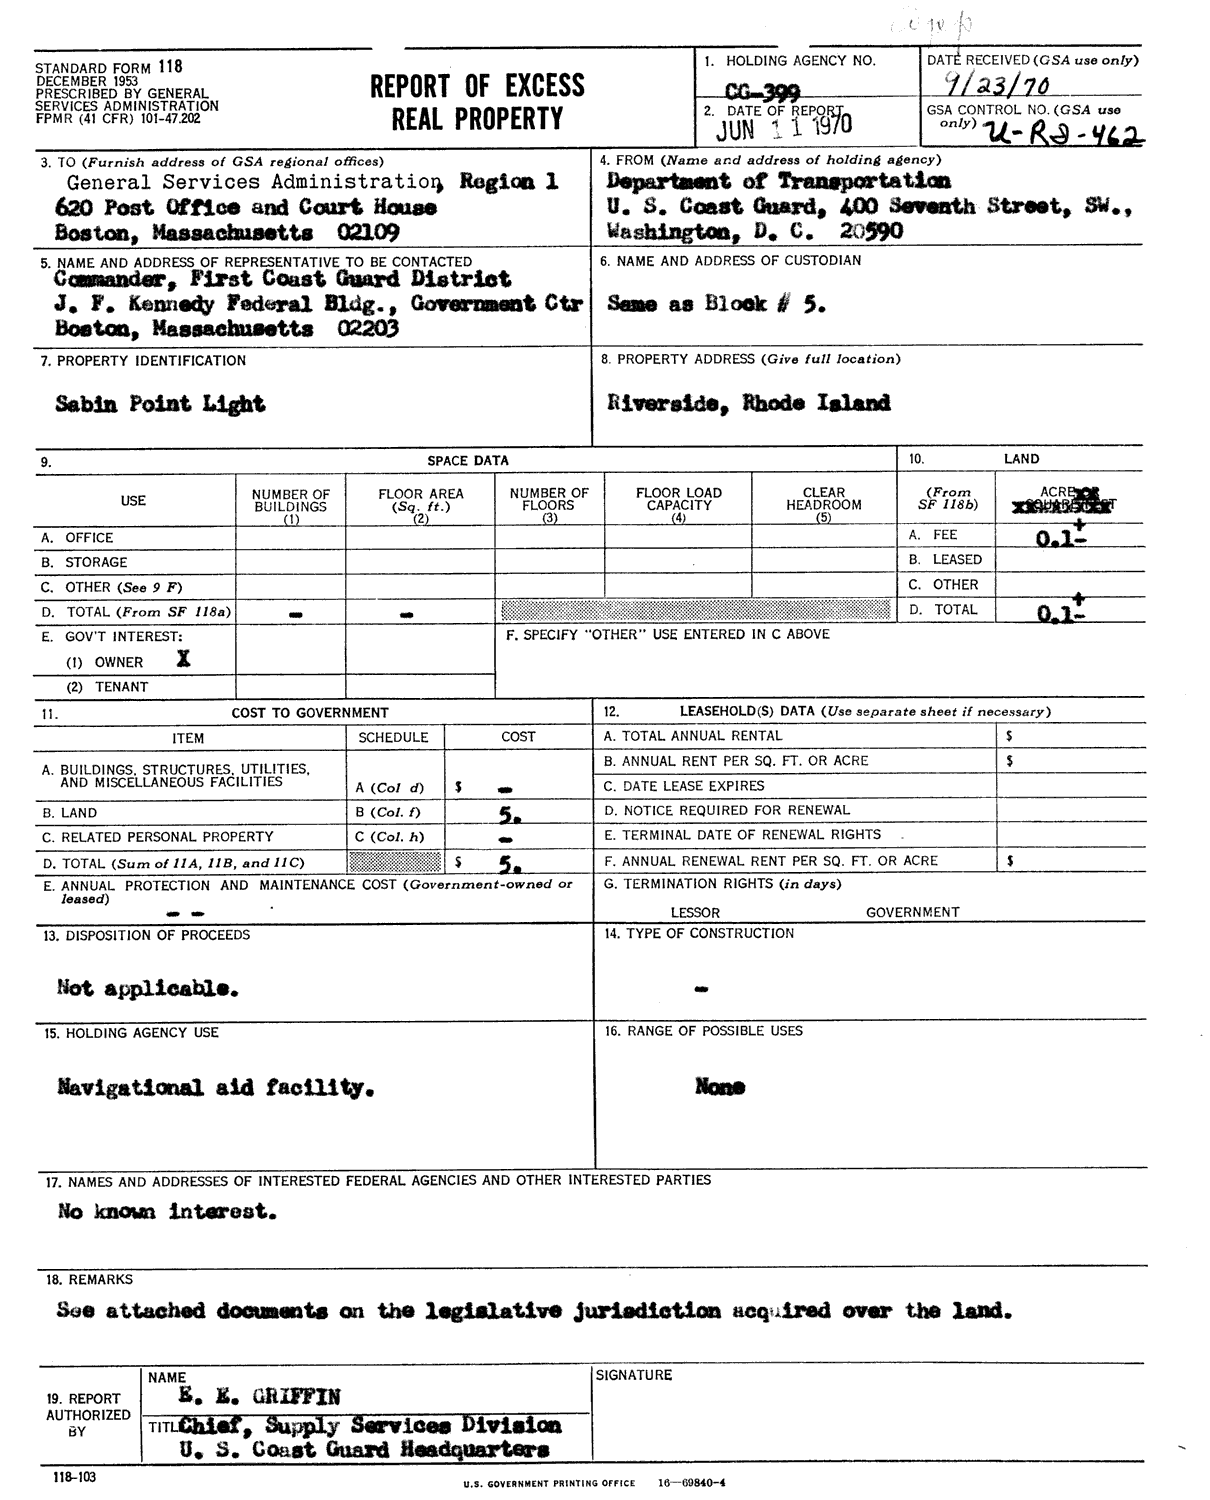 Sabin Point Light - Form 118 - Report of Excess Real Property - 1970